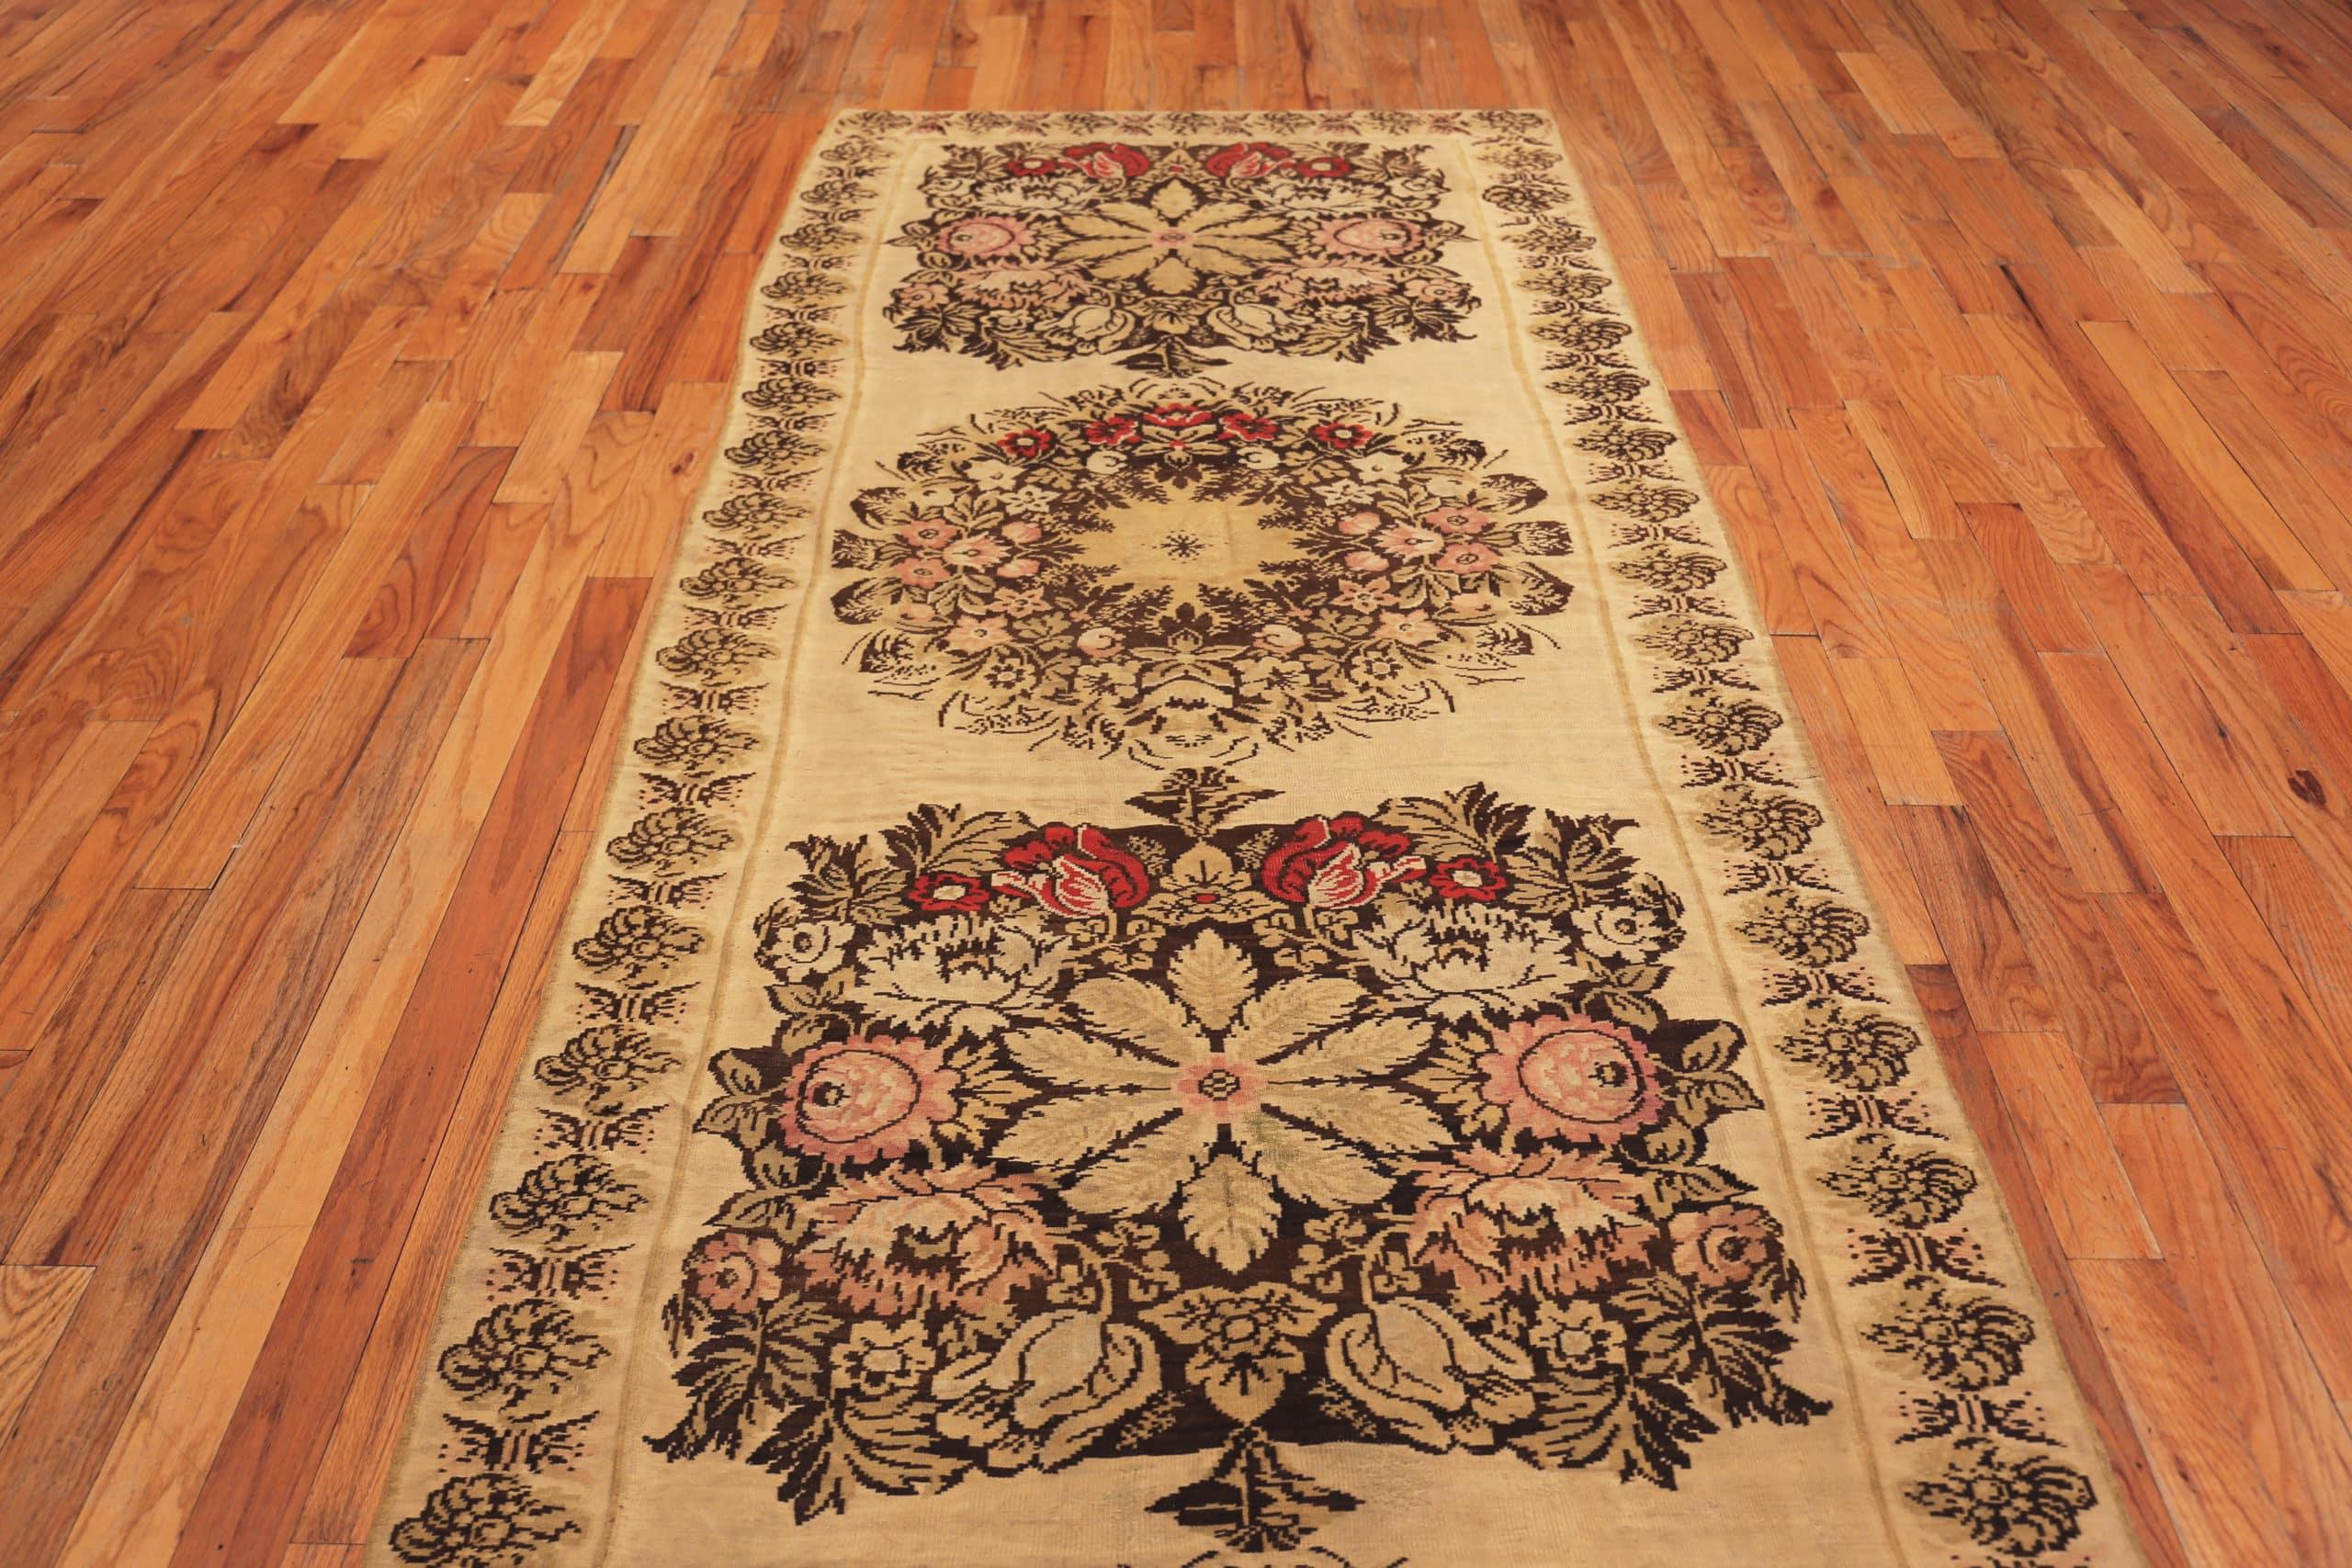 Antique Flat Woven Bessarabian Kilim Runner Rug, Country of Origin: Romania, Circa date: 1900. Size: 4 ft 3 in x 13 ft (1.3 m x 3.96 m)
 